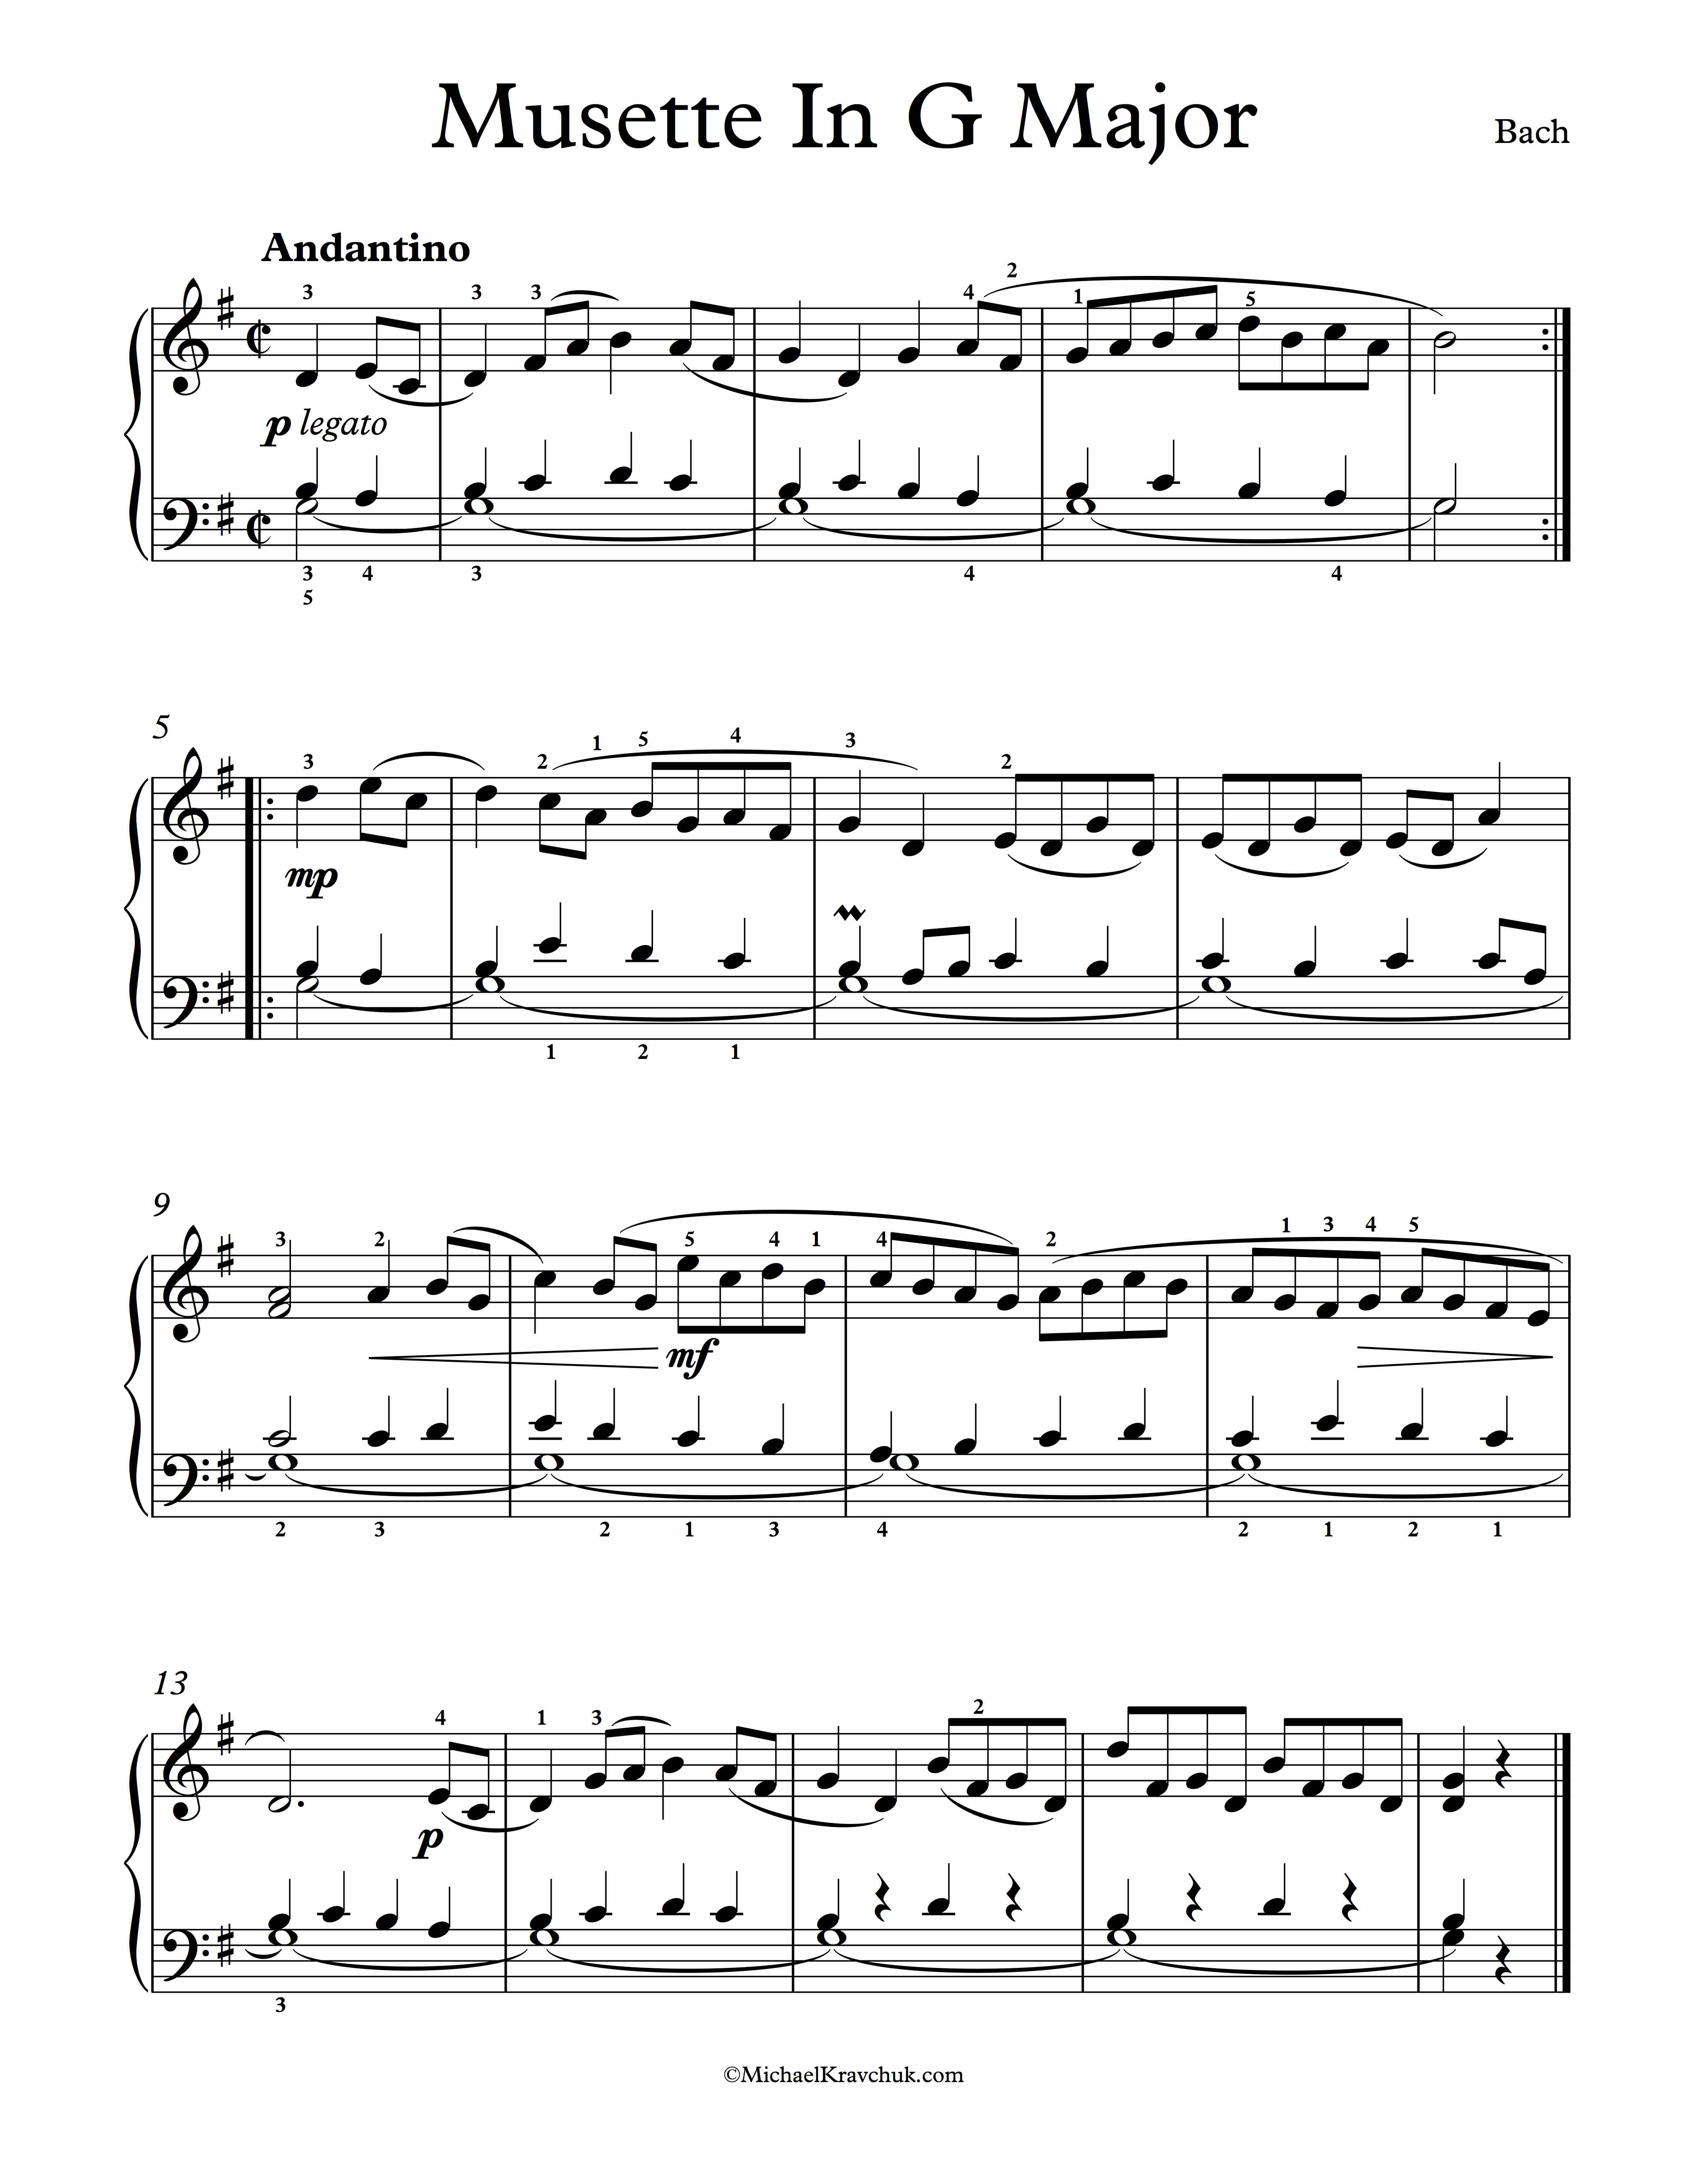 Free Piano Sheet Music - Musette In G Major BWV 808 - Bach